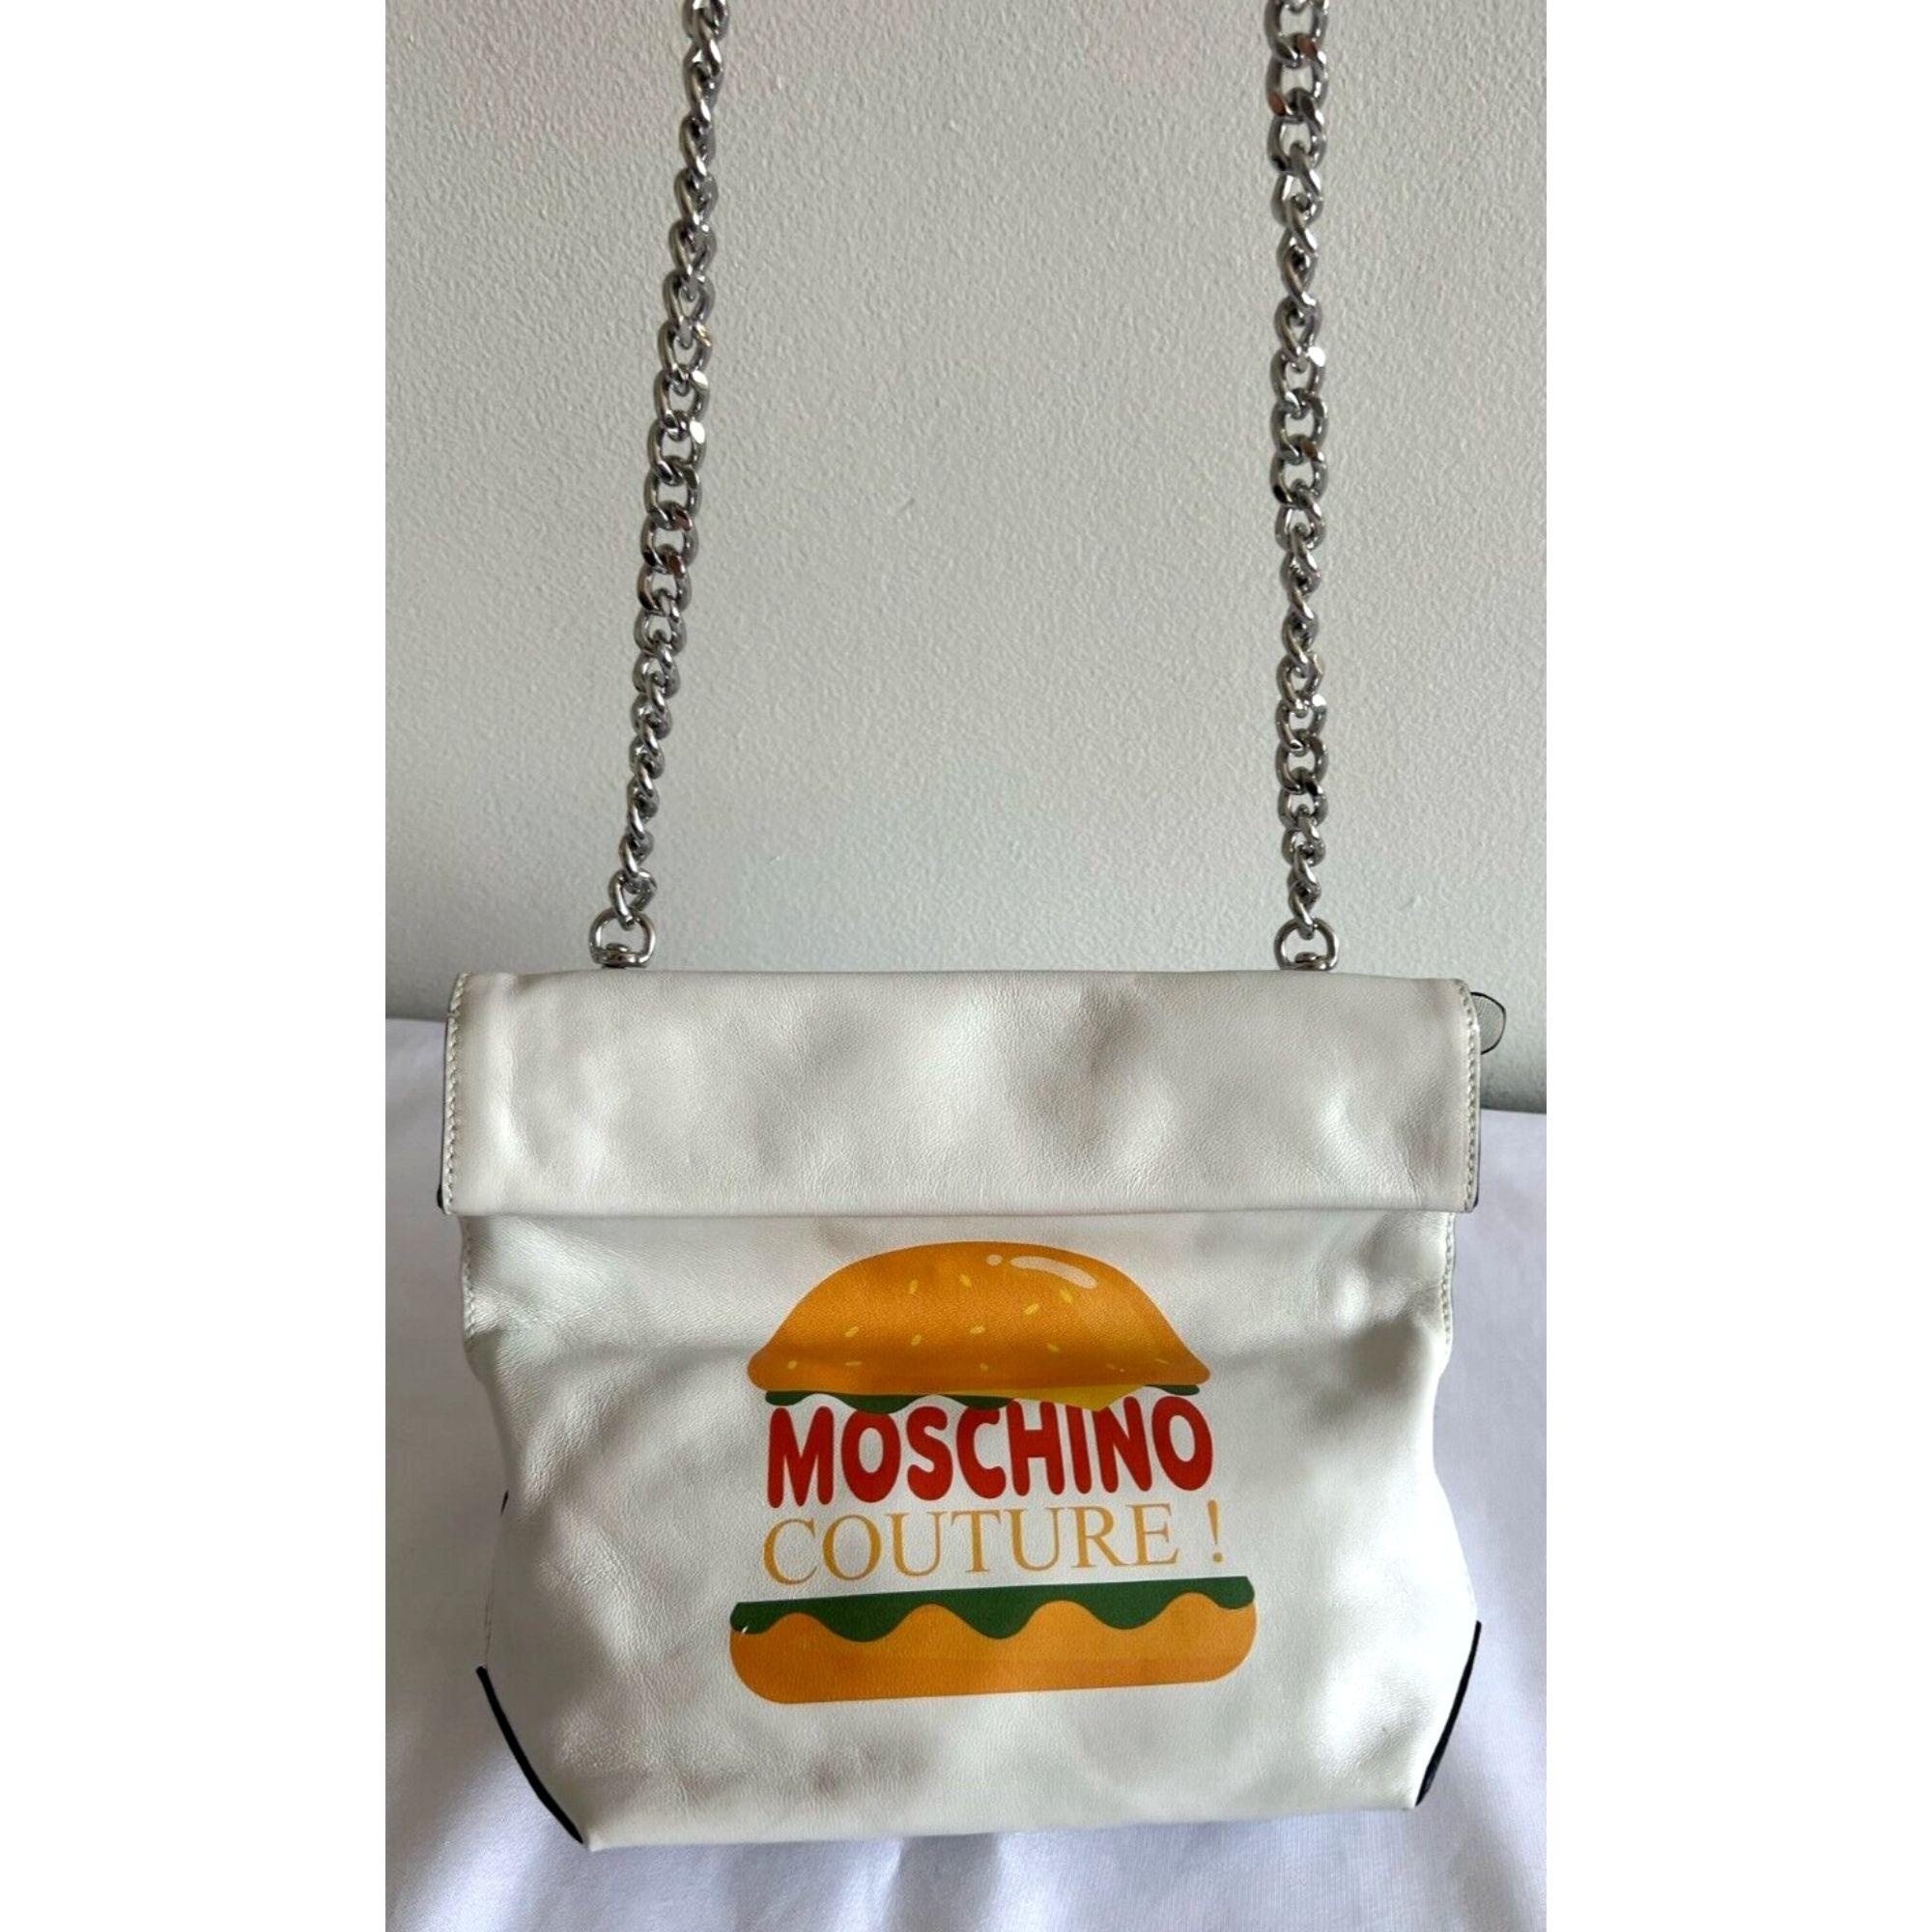 SS22 Moschino Couture The Diner White Leather Lunch Bag Hamburger In New Condition For Sale In Matthews, NC